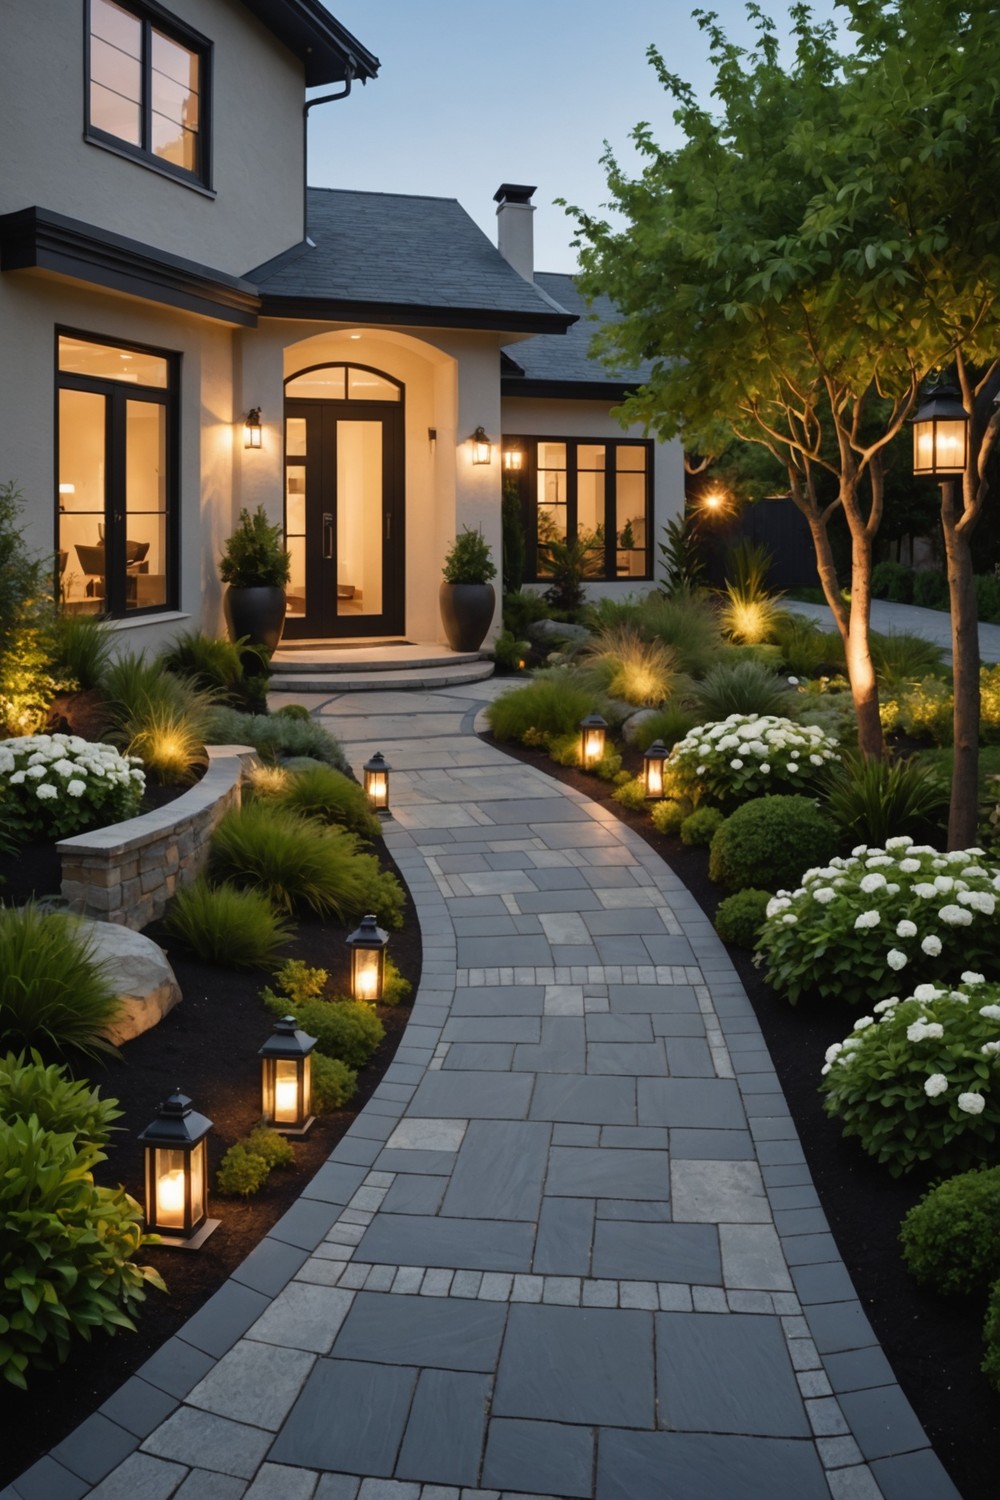 Creating a Dramatic Entrance with a Statement Pathway